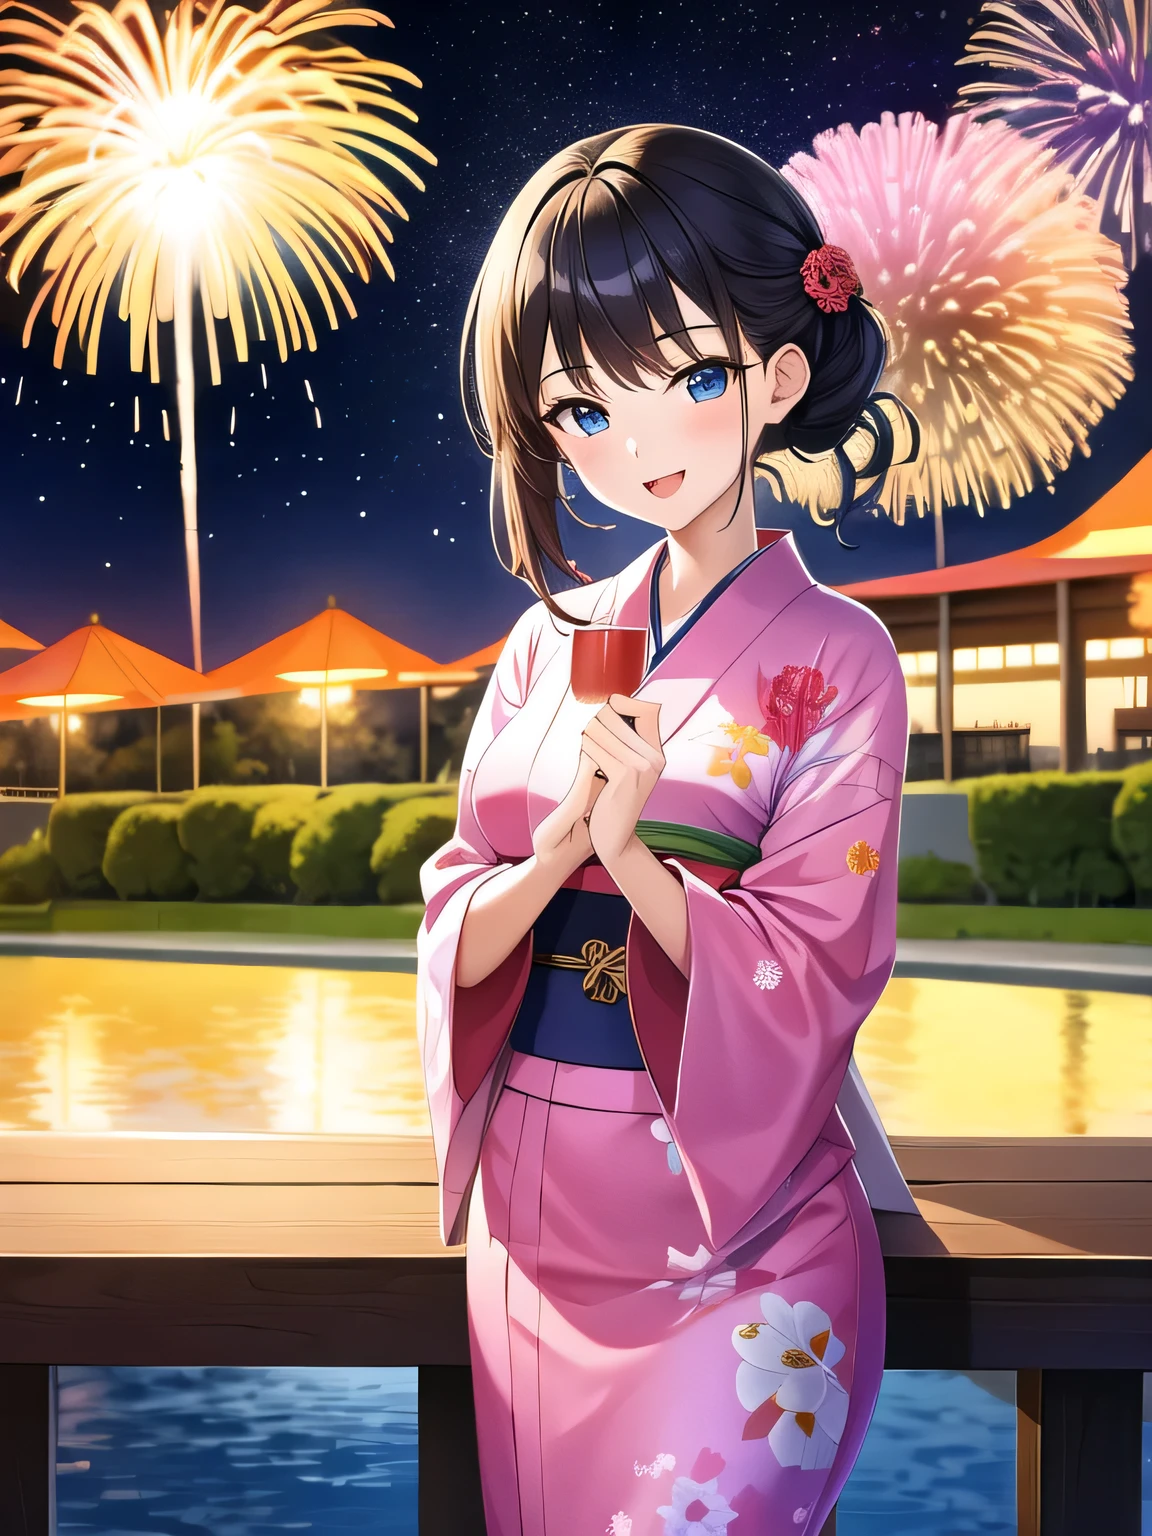 (masterpiece, highest quality:1.2), 1 girl, alone、Yukata figure、Being at the fireworks display、big fireworks go off in the sky、A person enjoying cotton candy in hand